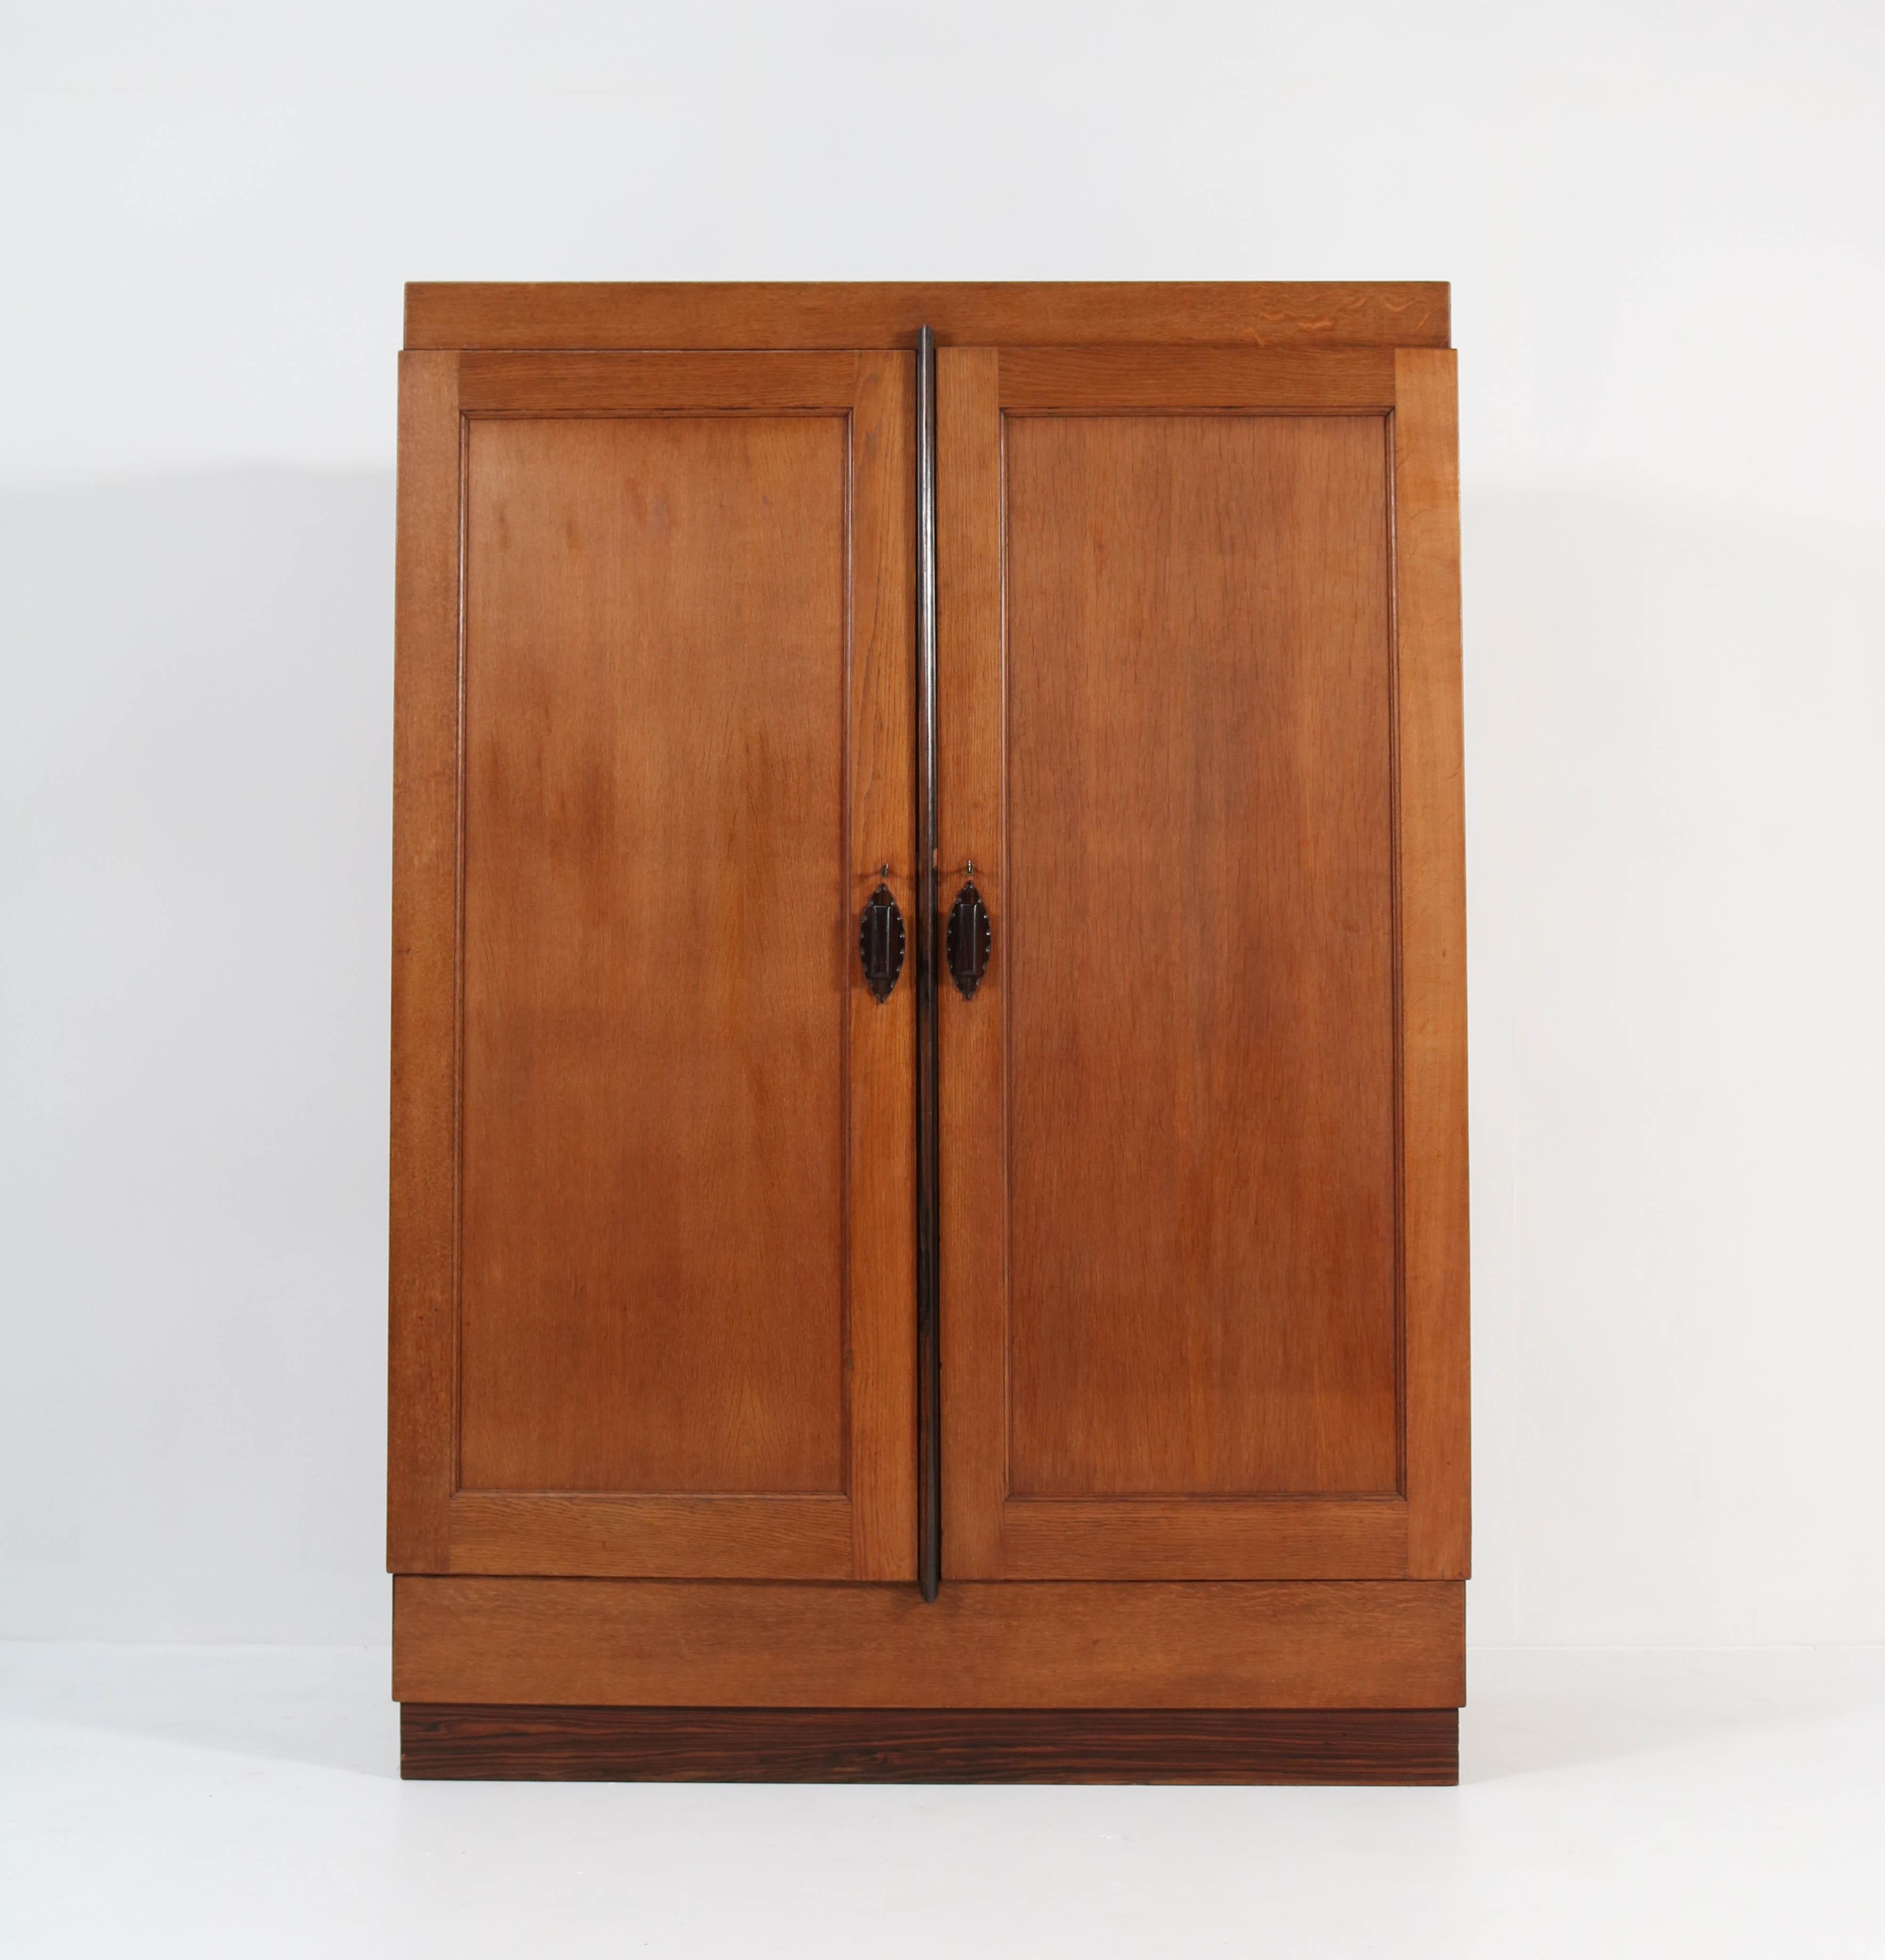 Stunning and rare Art Deco Amsterdam School armoire or wardrobe.
Design by H.W. Tolenaar Rotterdam.
Striking Dutch design from the 1920s.
Oak with original solid Macassar ebony handles and lining.
Four original solid oak shelves adjustable in